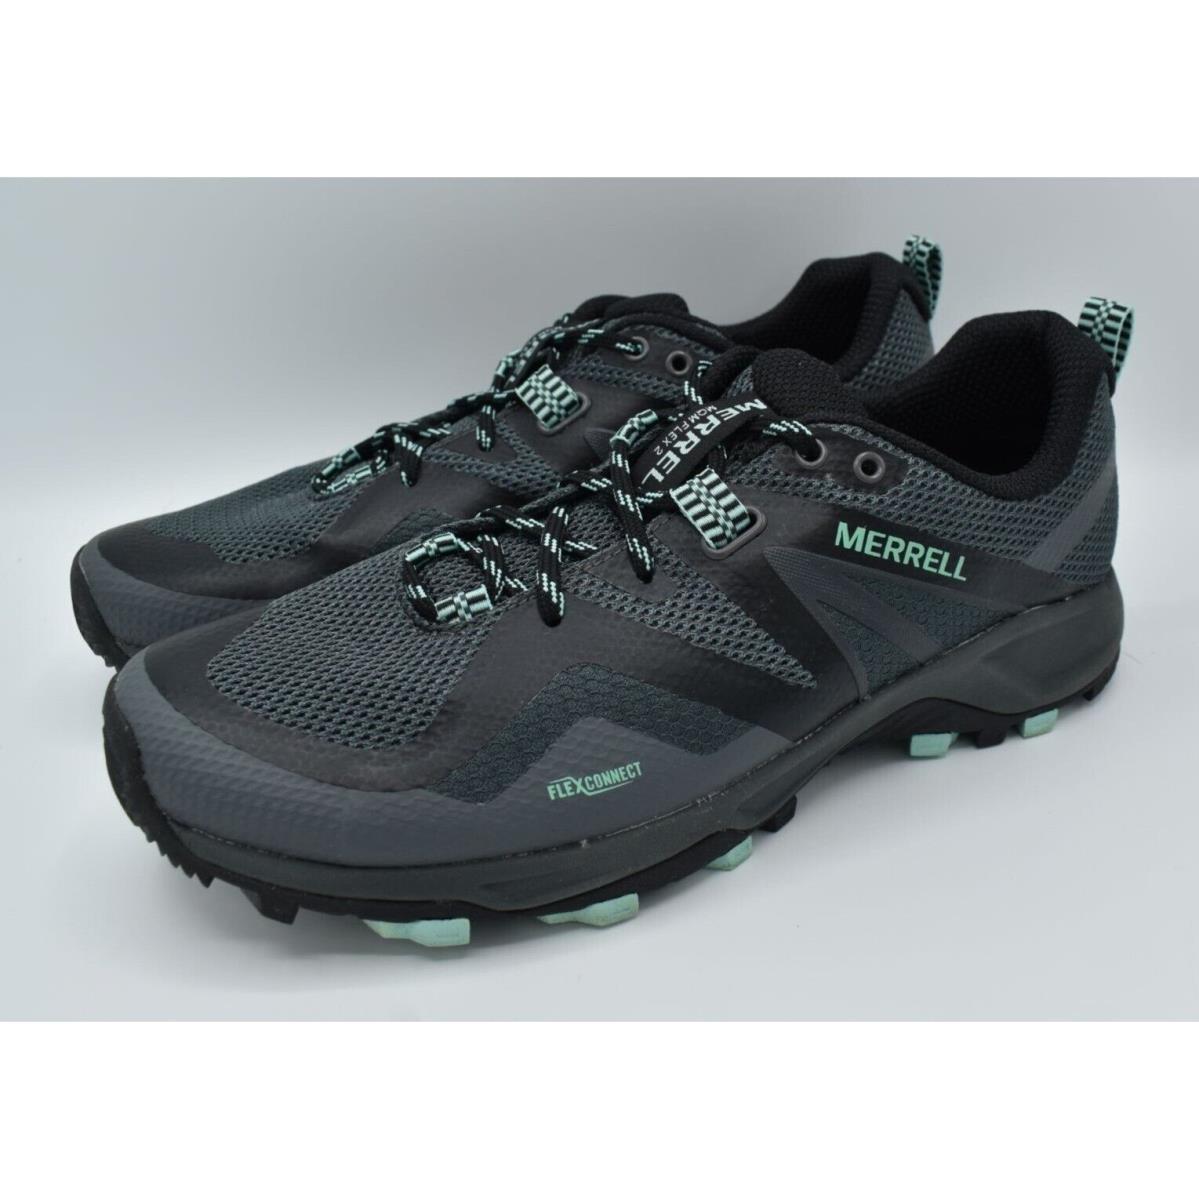 Merrell Womens Size 11 Mqm Flex 2 Low Granite Wave Trail Hiking Outdoor Shoes